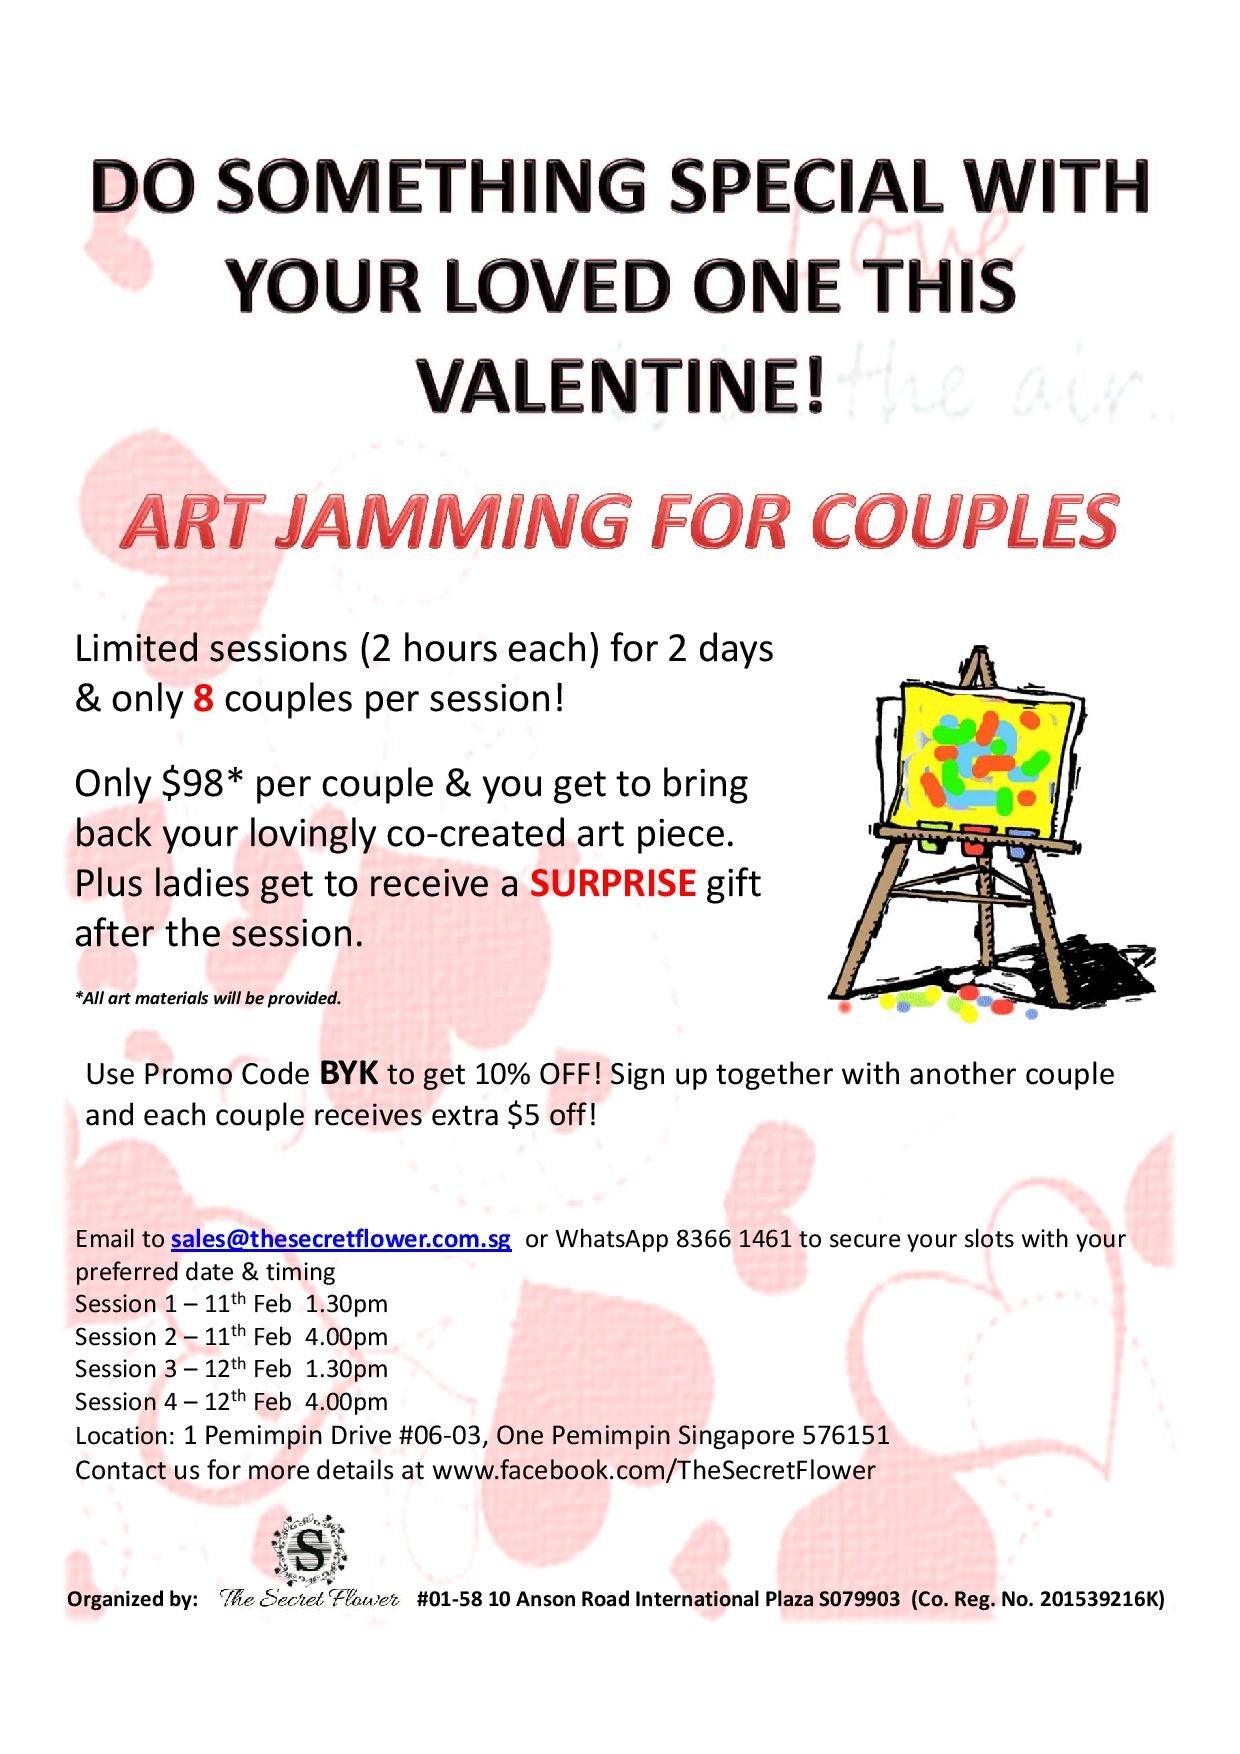 Things to do this Weekend (Valentines Day Special): Art Jamming with your Spouse!